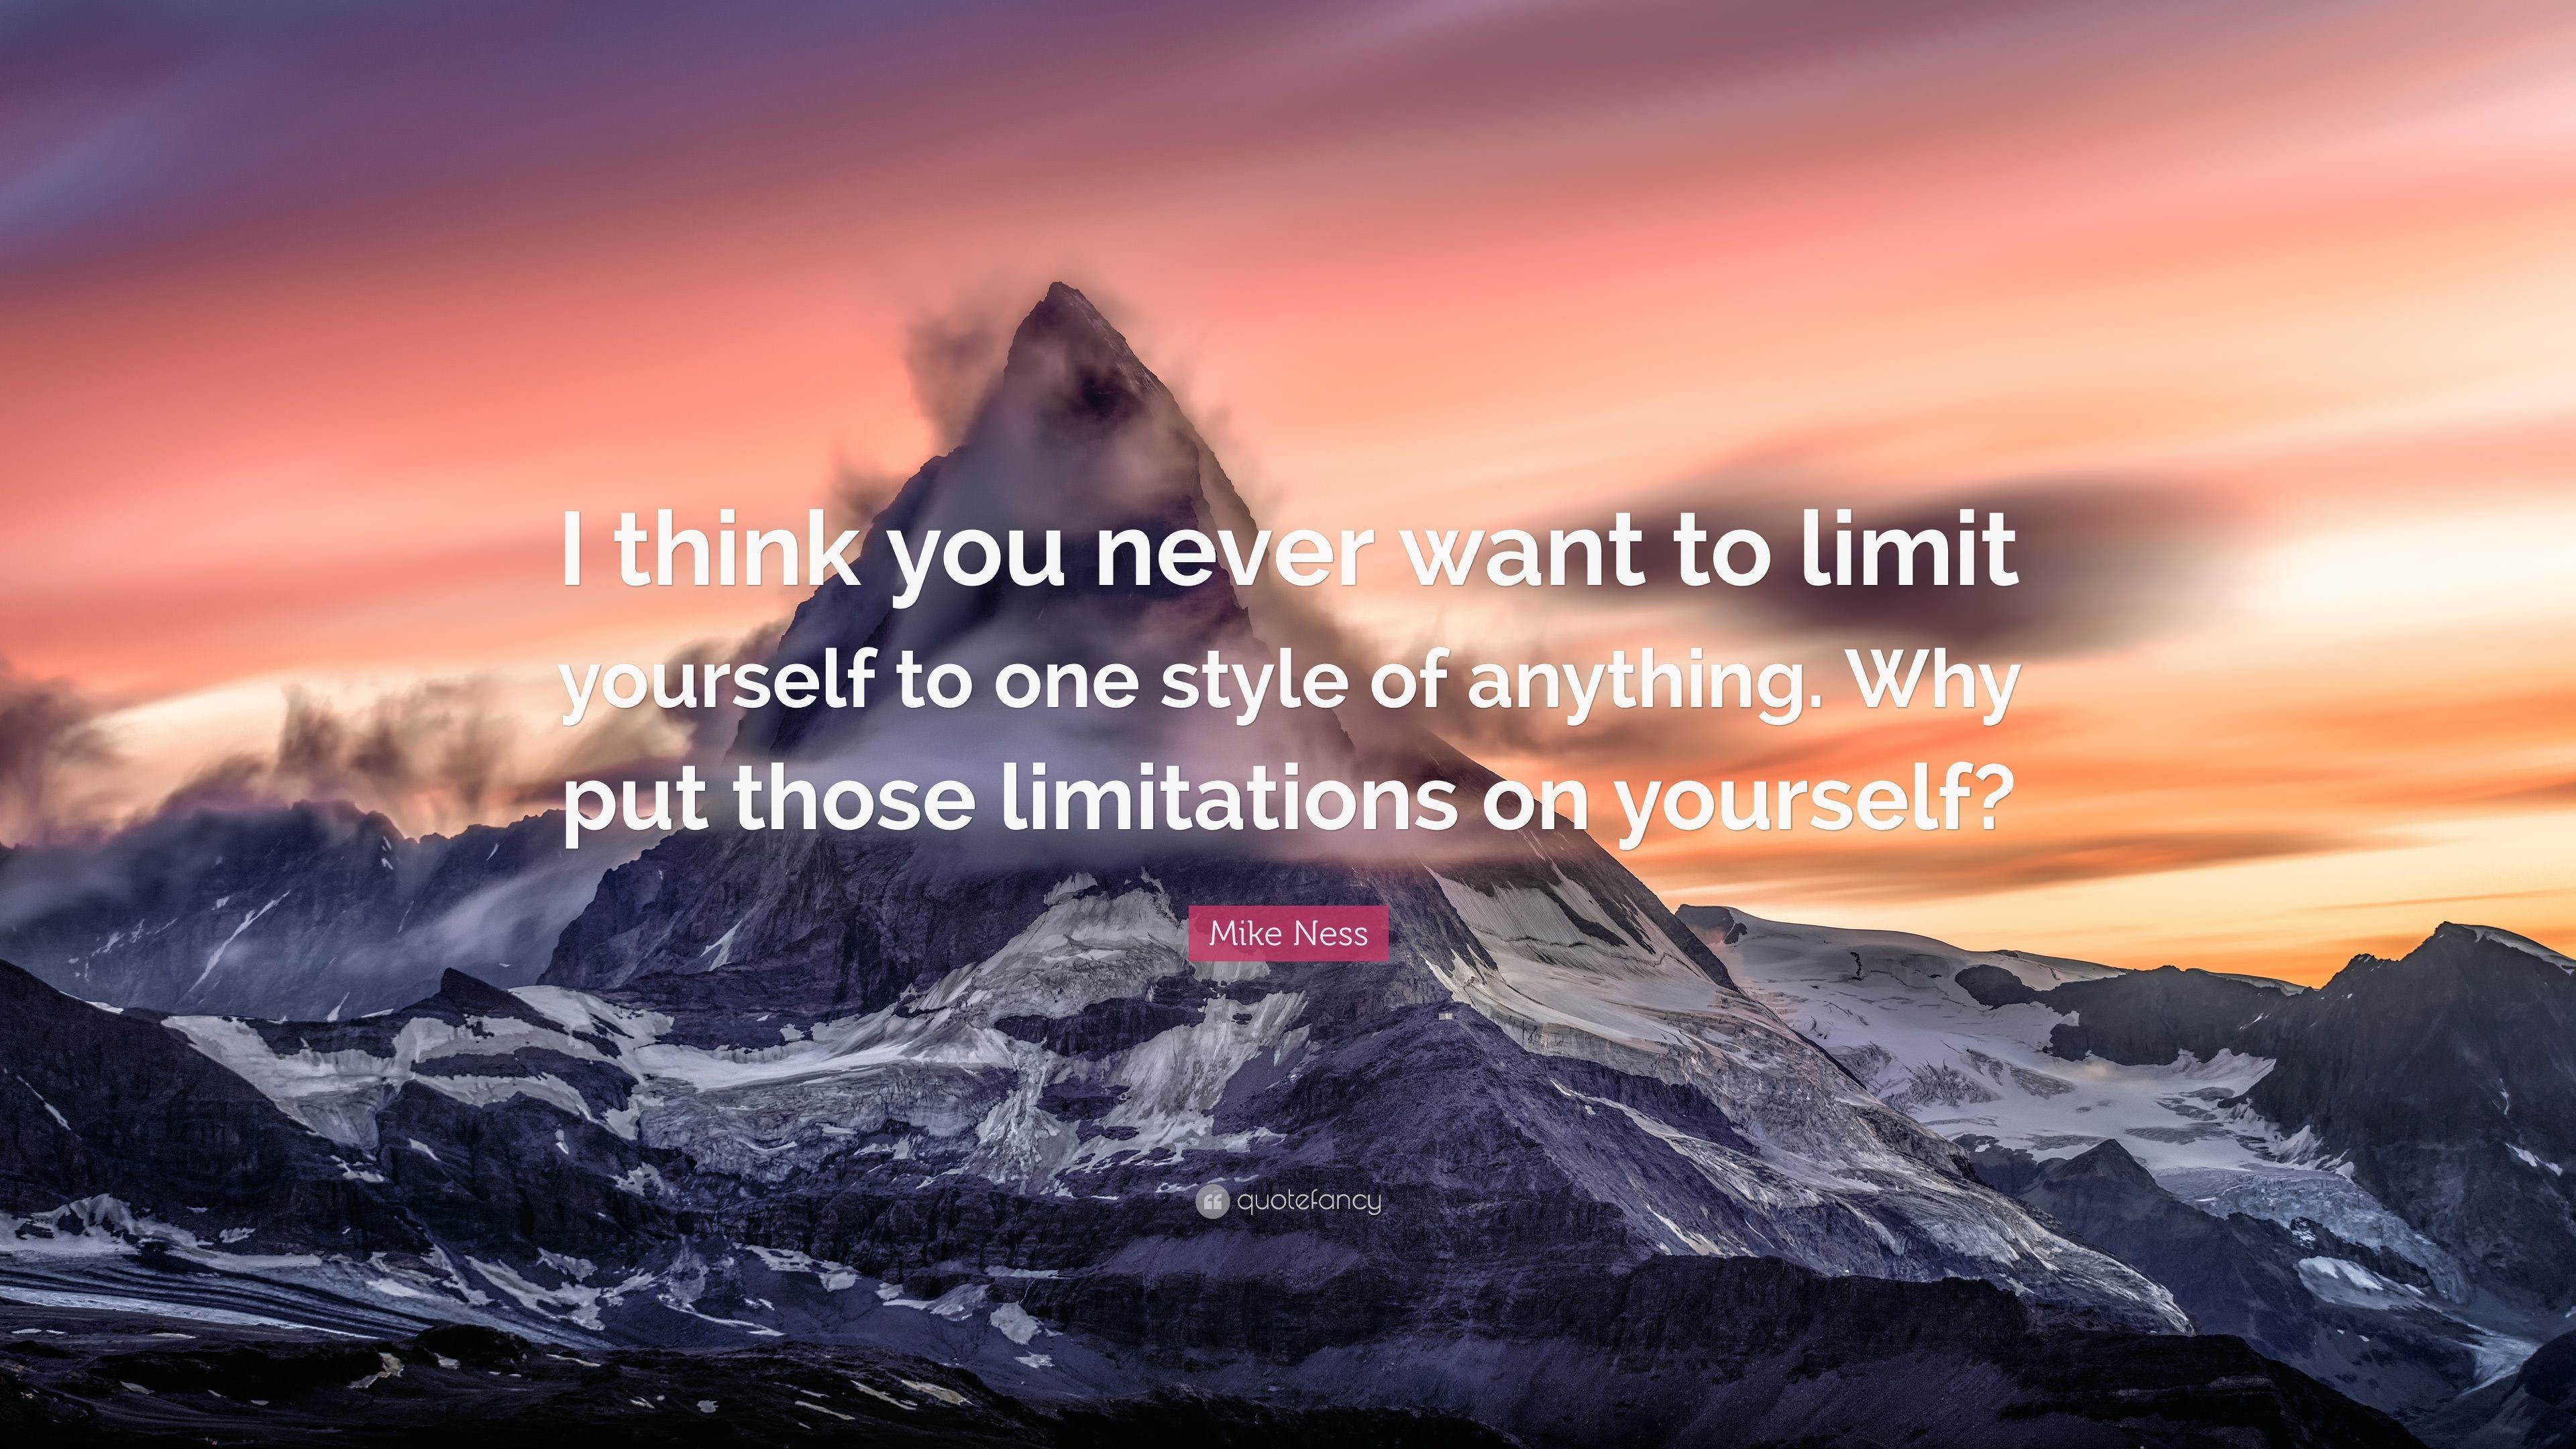 3840x2160 Mike Ness Quote: “I think you never want to limit yourself to one style